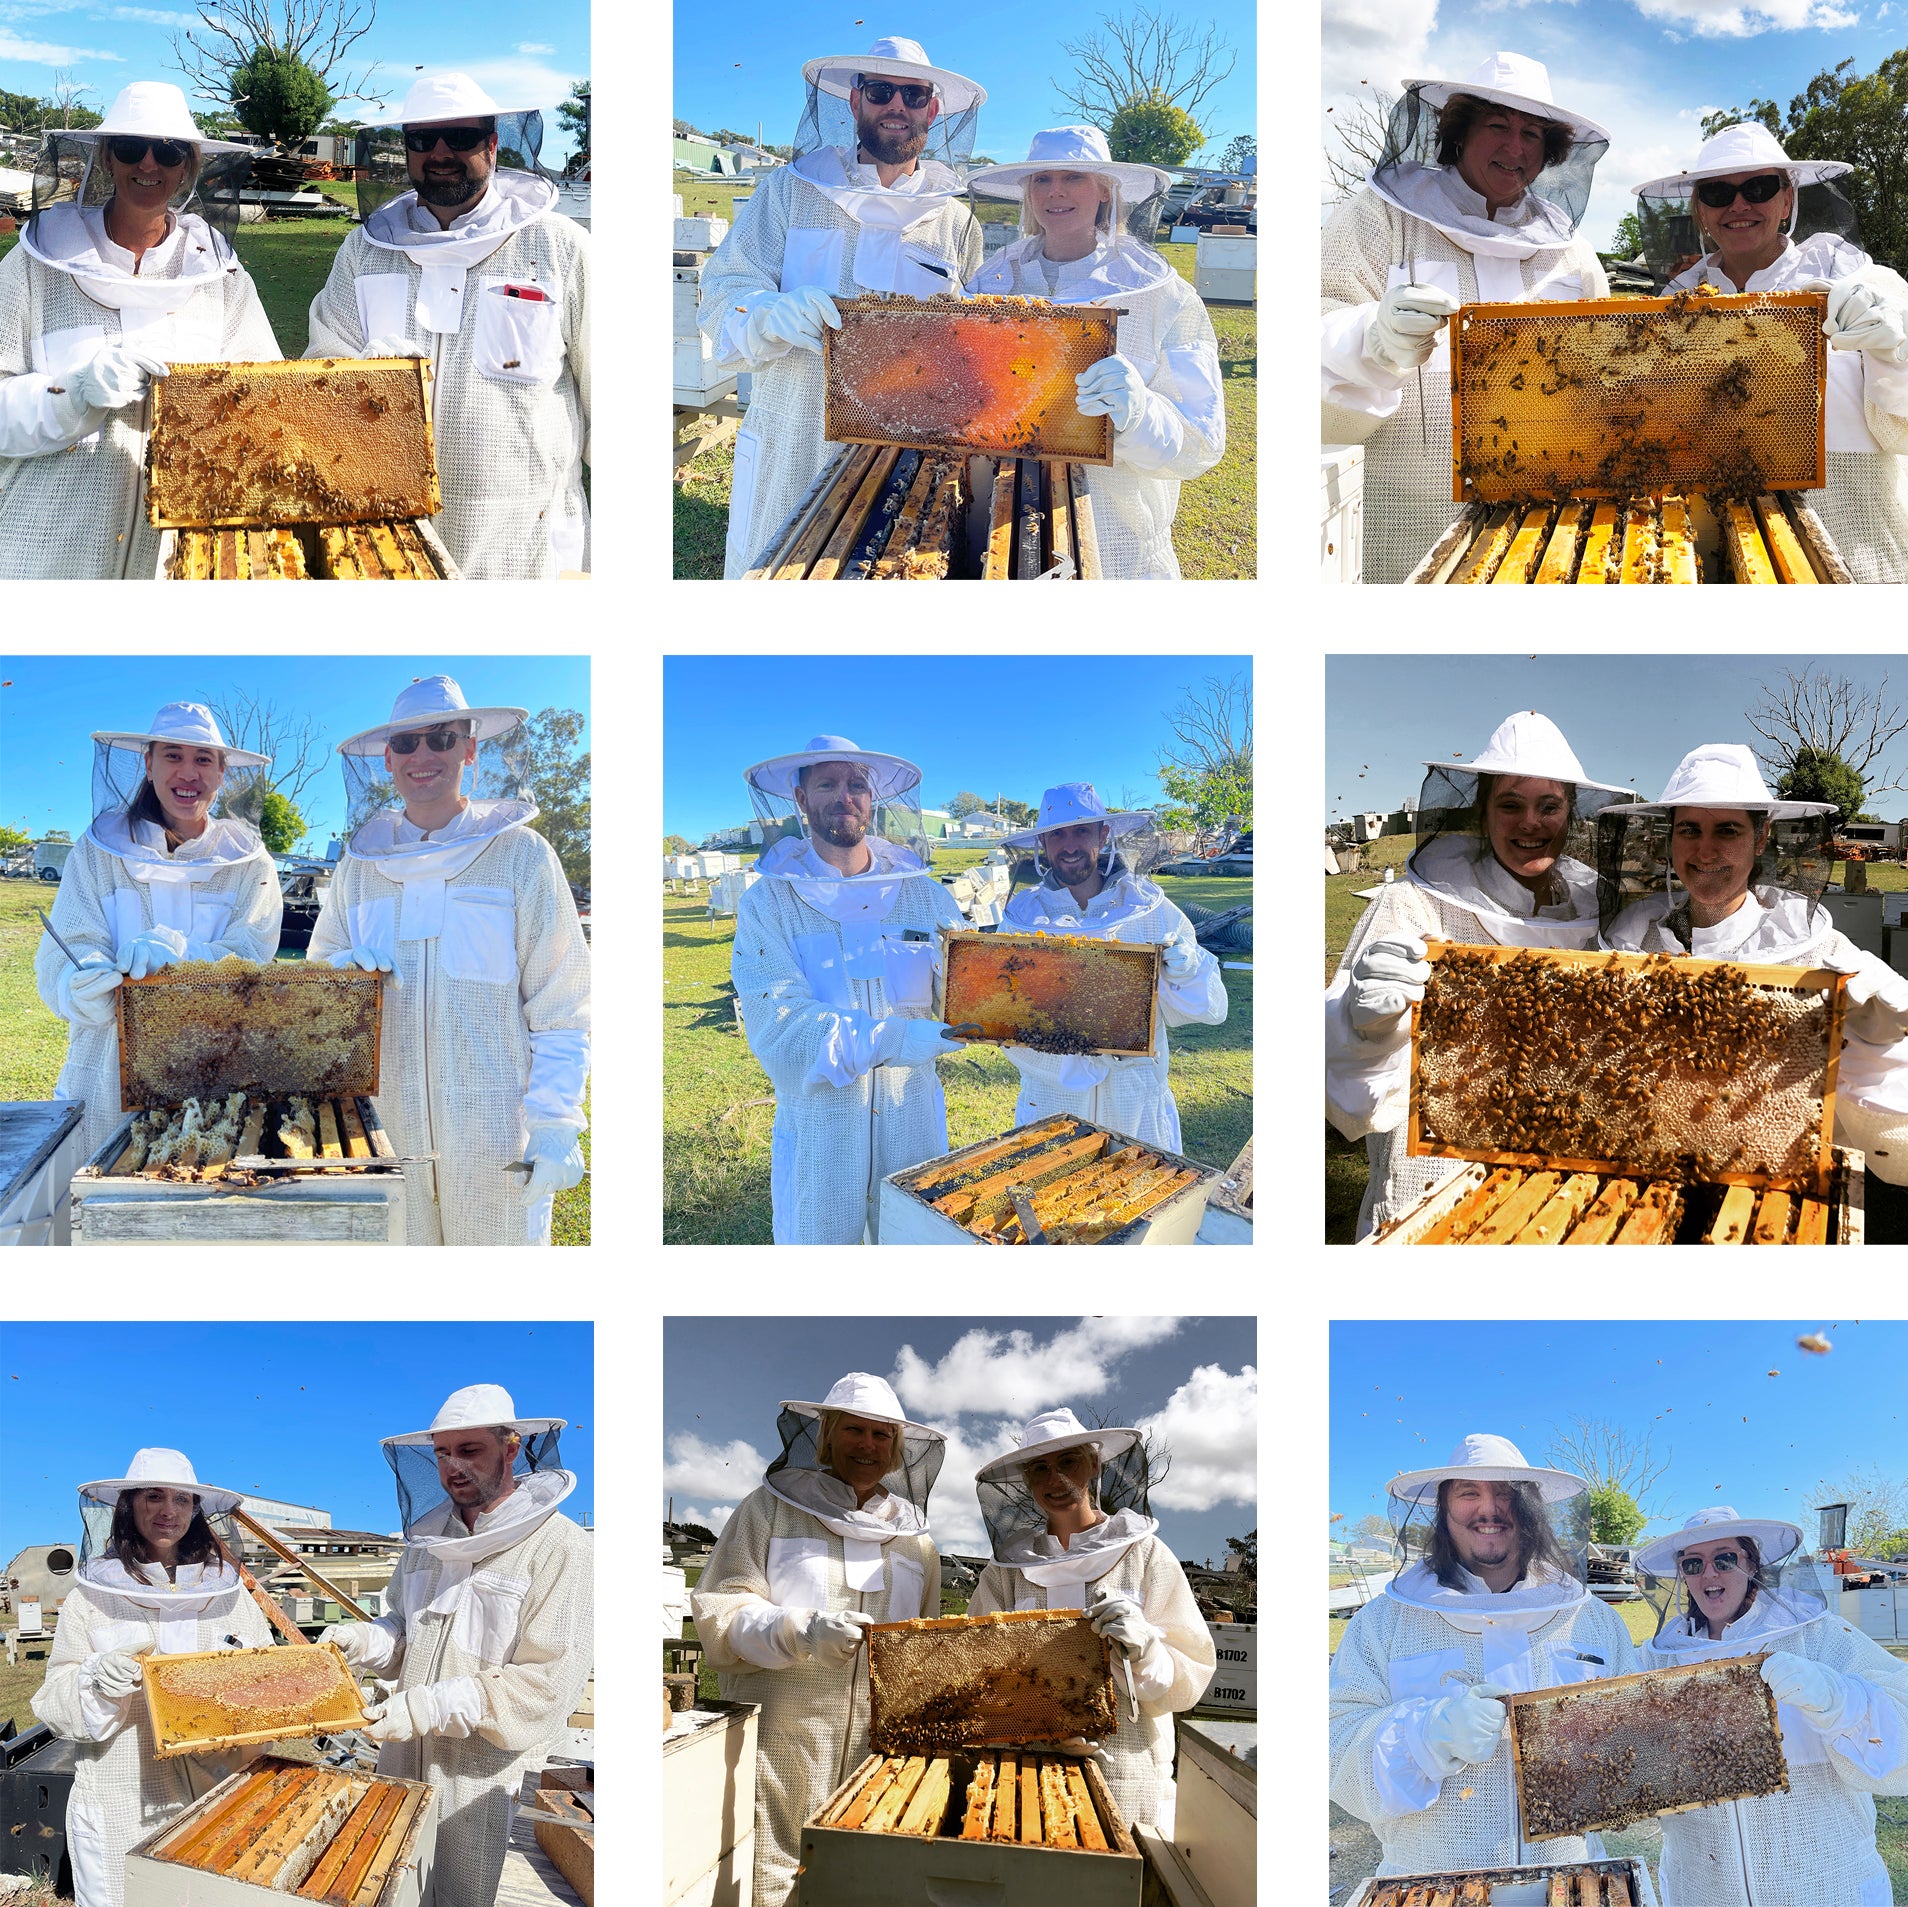 Bee Farm Tour - 'Sunrise with the Bees' - From Two Busy Bees Honey